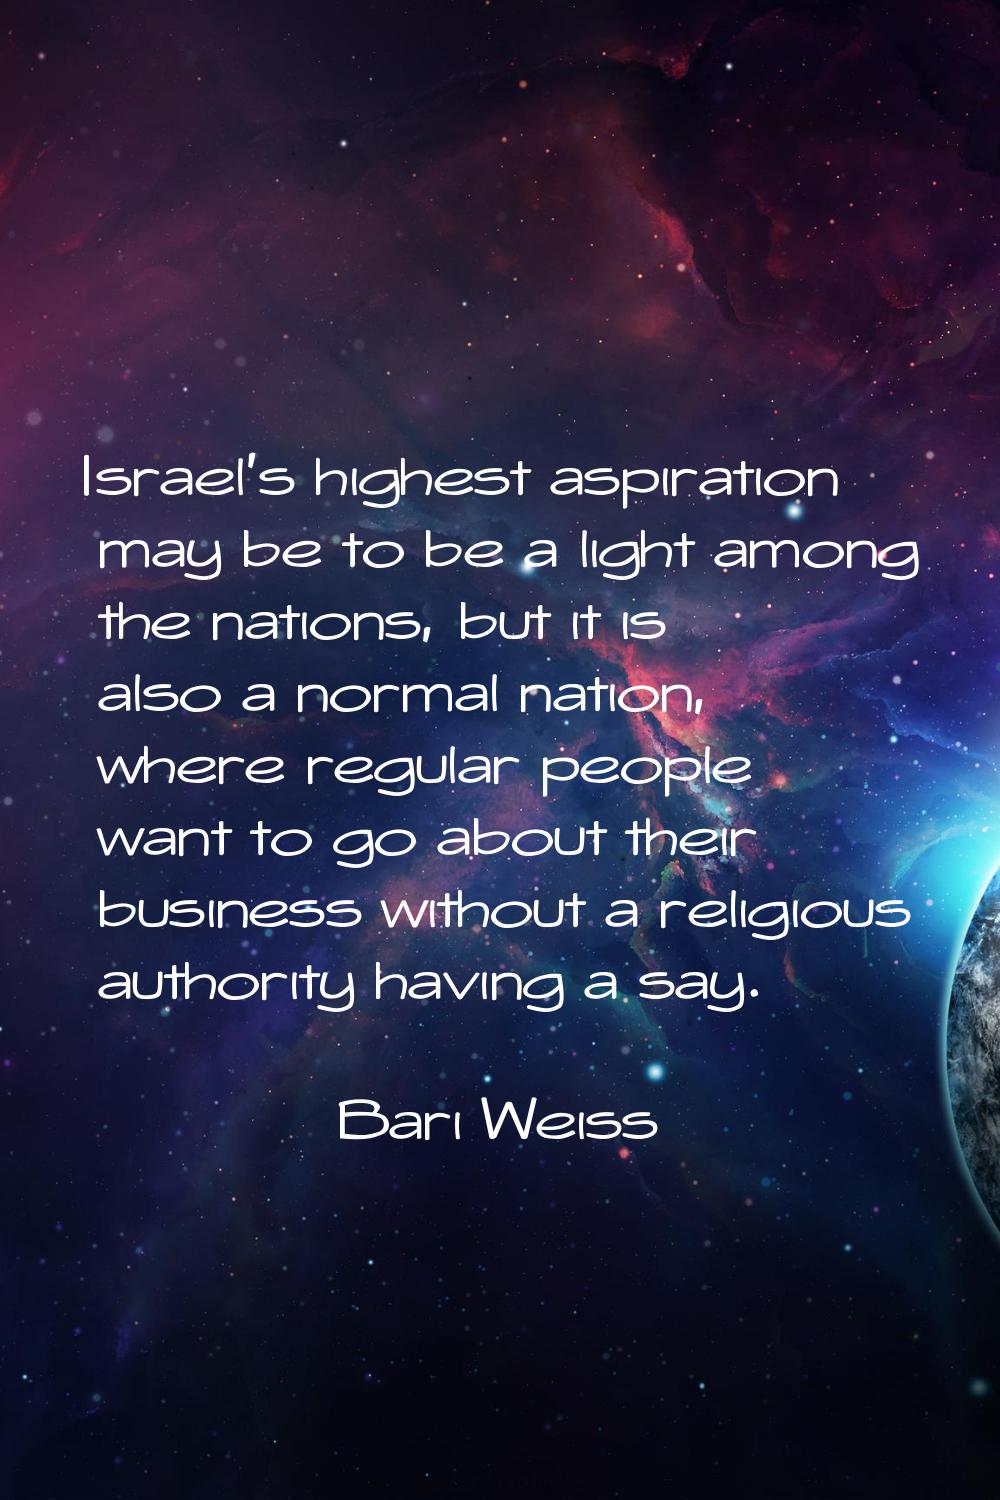 Israel's highest aspiration may be to be a light among the nations, but it is also a normal nation,